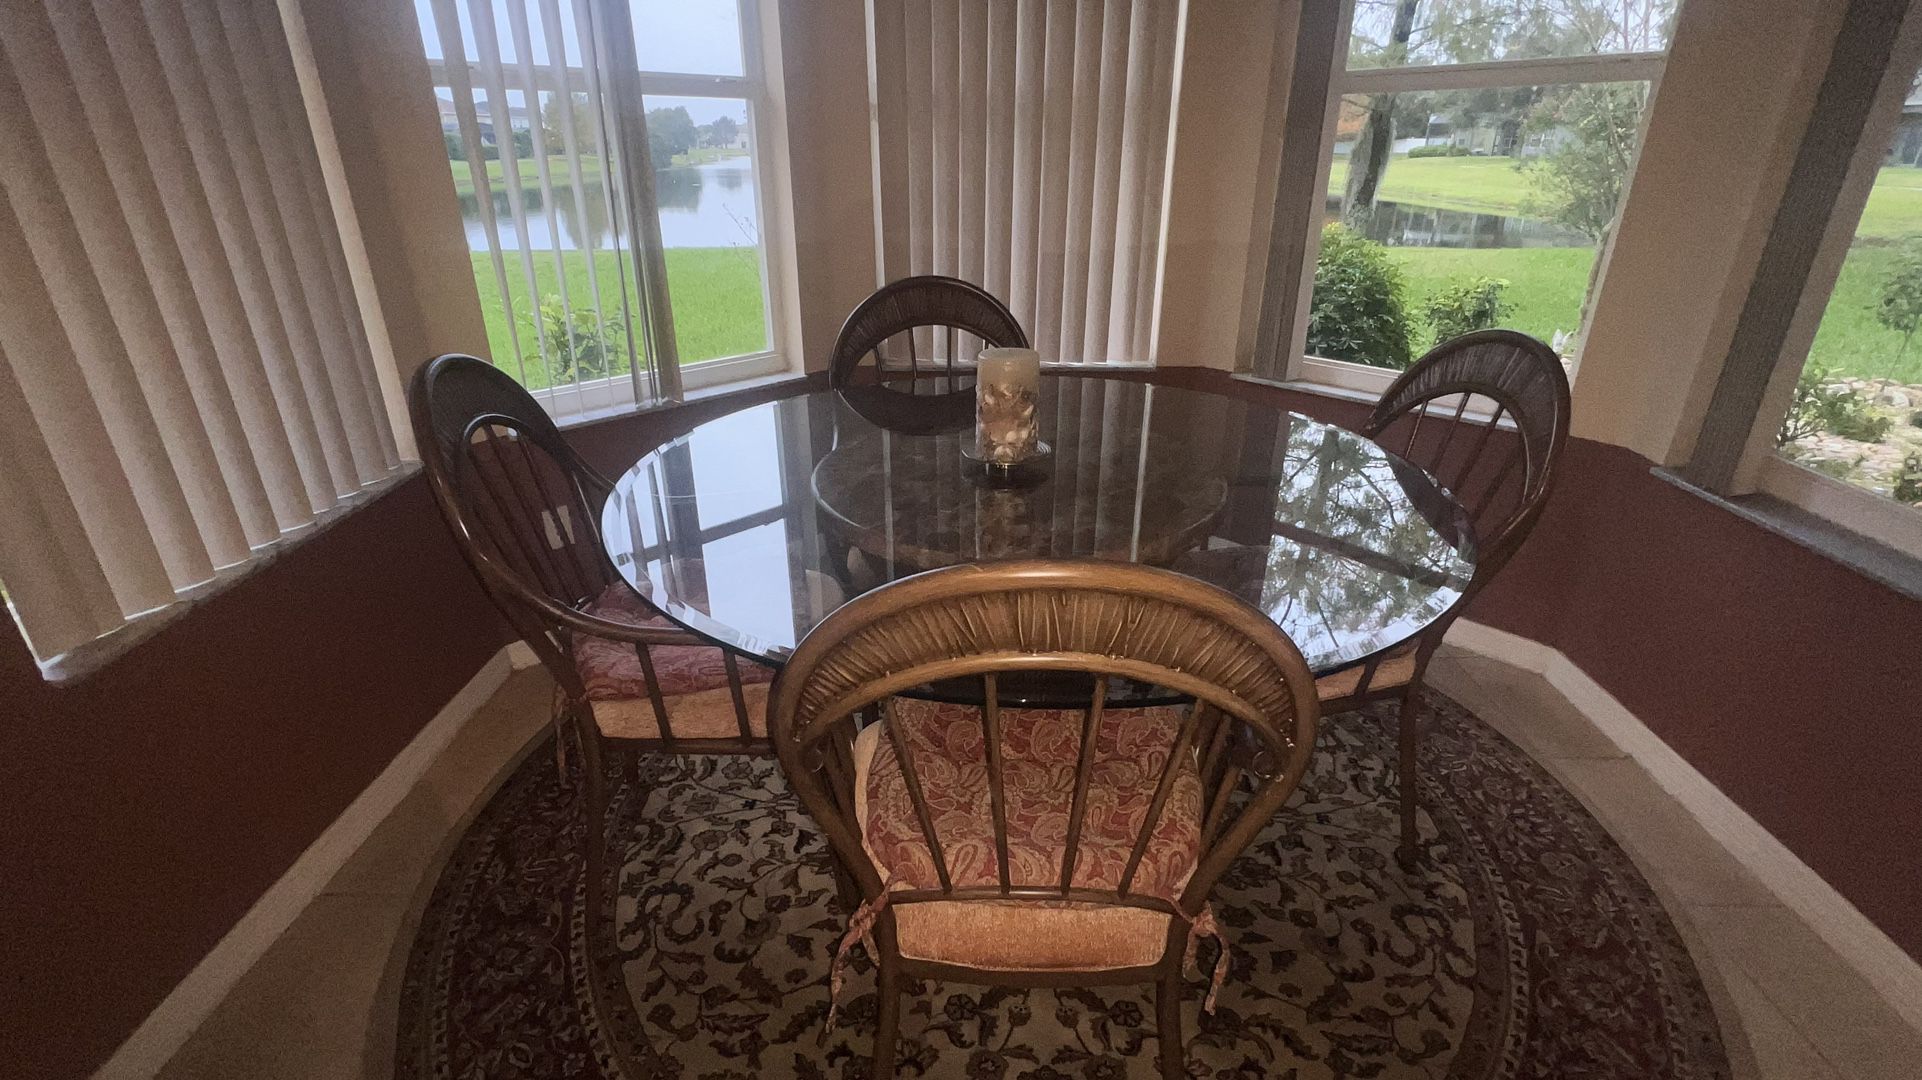 Breakfast Glass Dining Set- Excellent Condition 